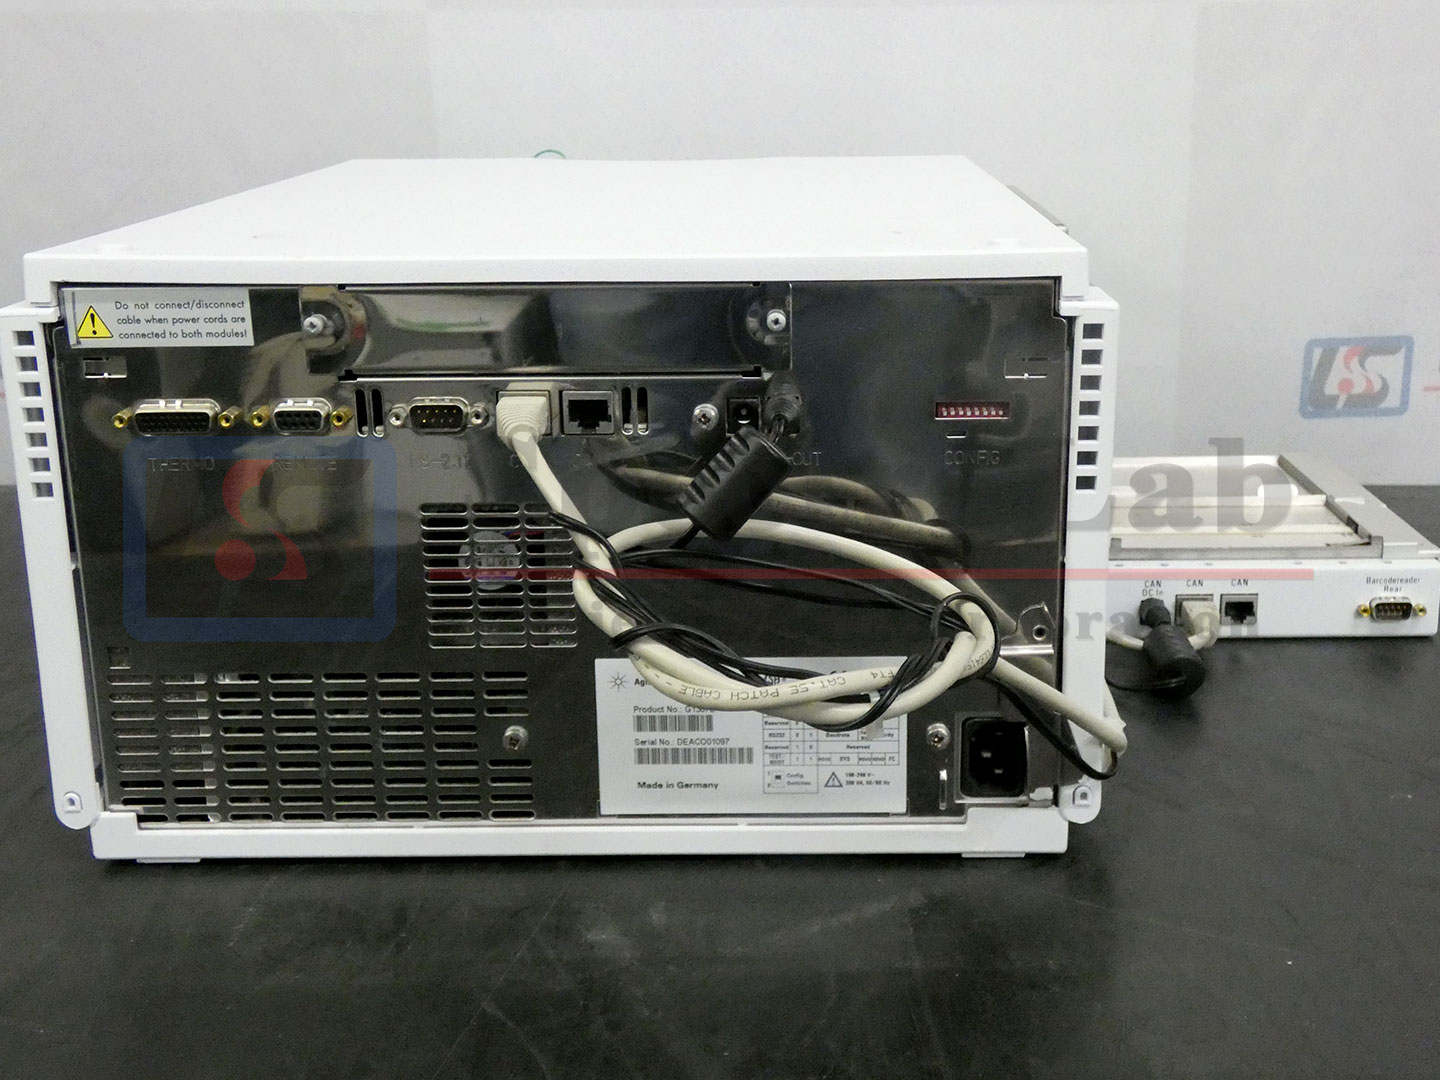 Agilent 1260 Infinity G1367E HiP ALS High Performance Autosampler with  G2254A AIF Automation Interface